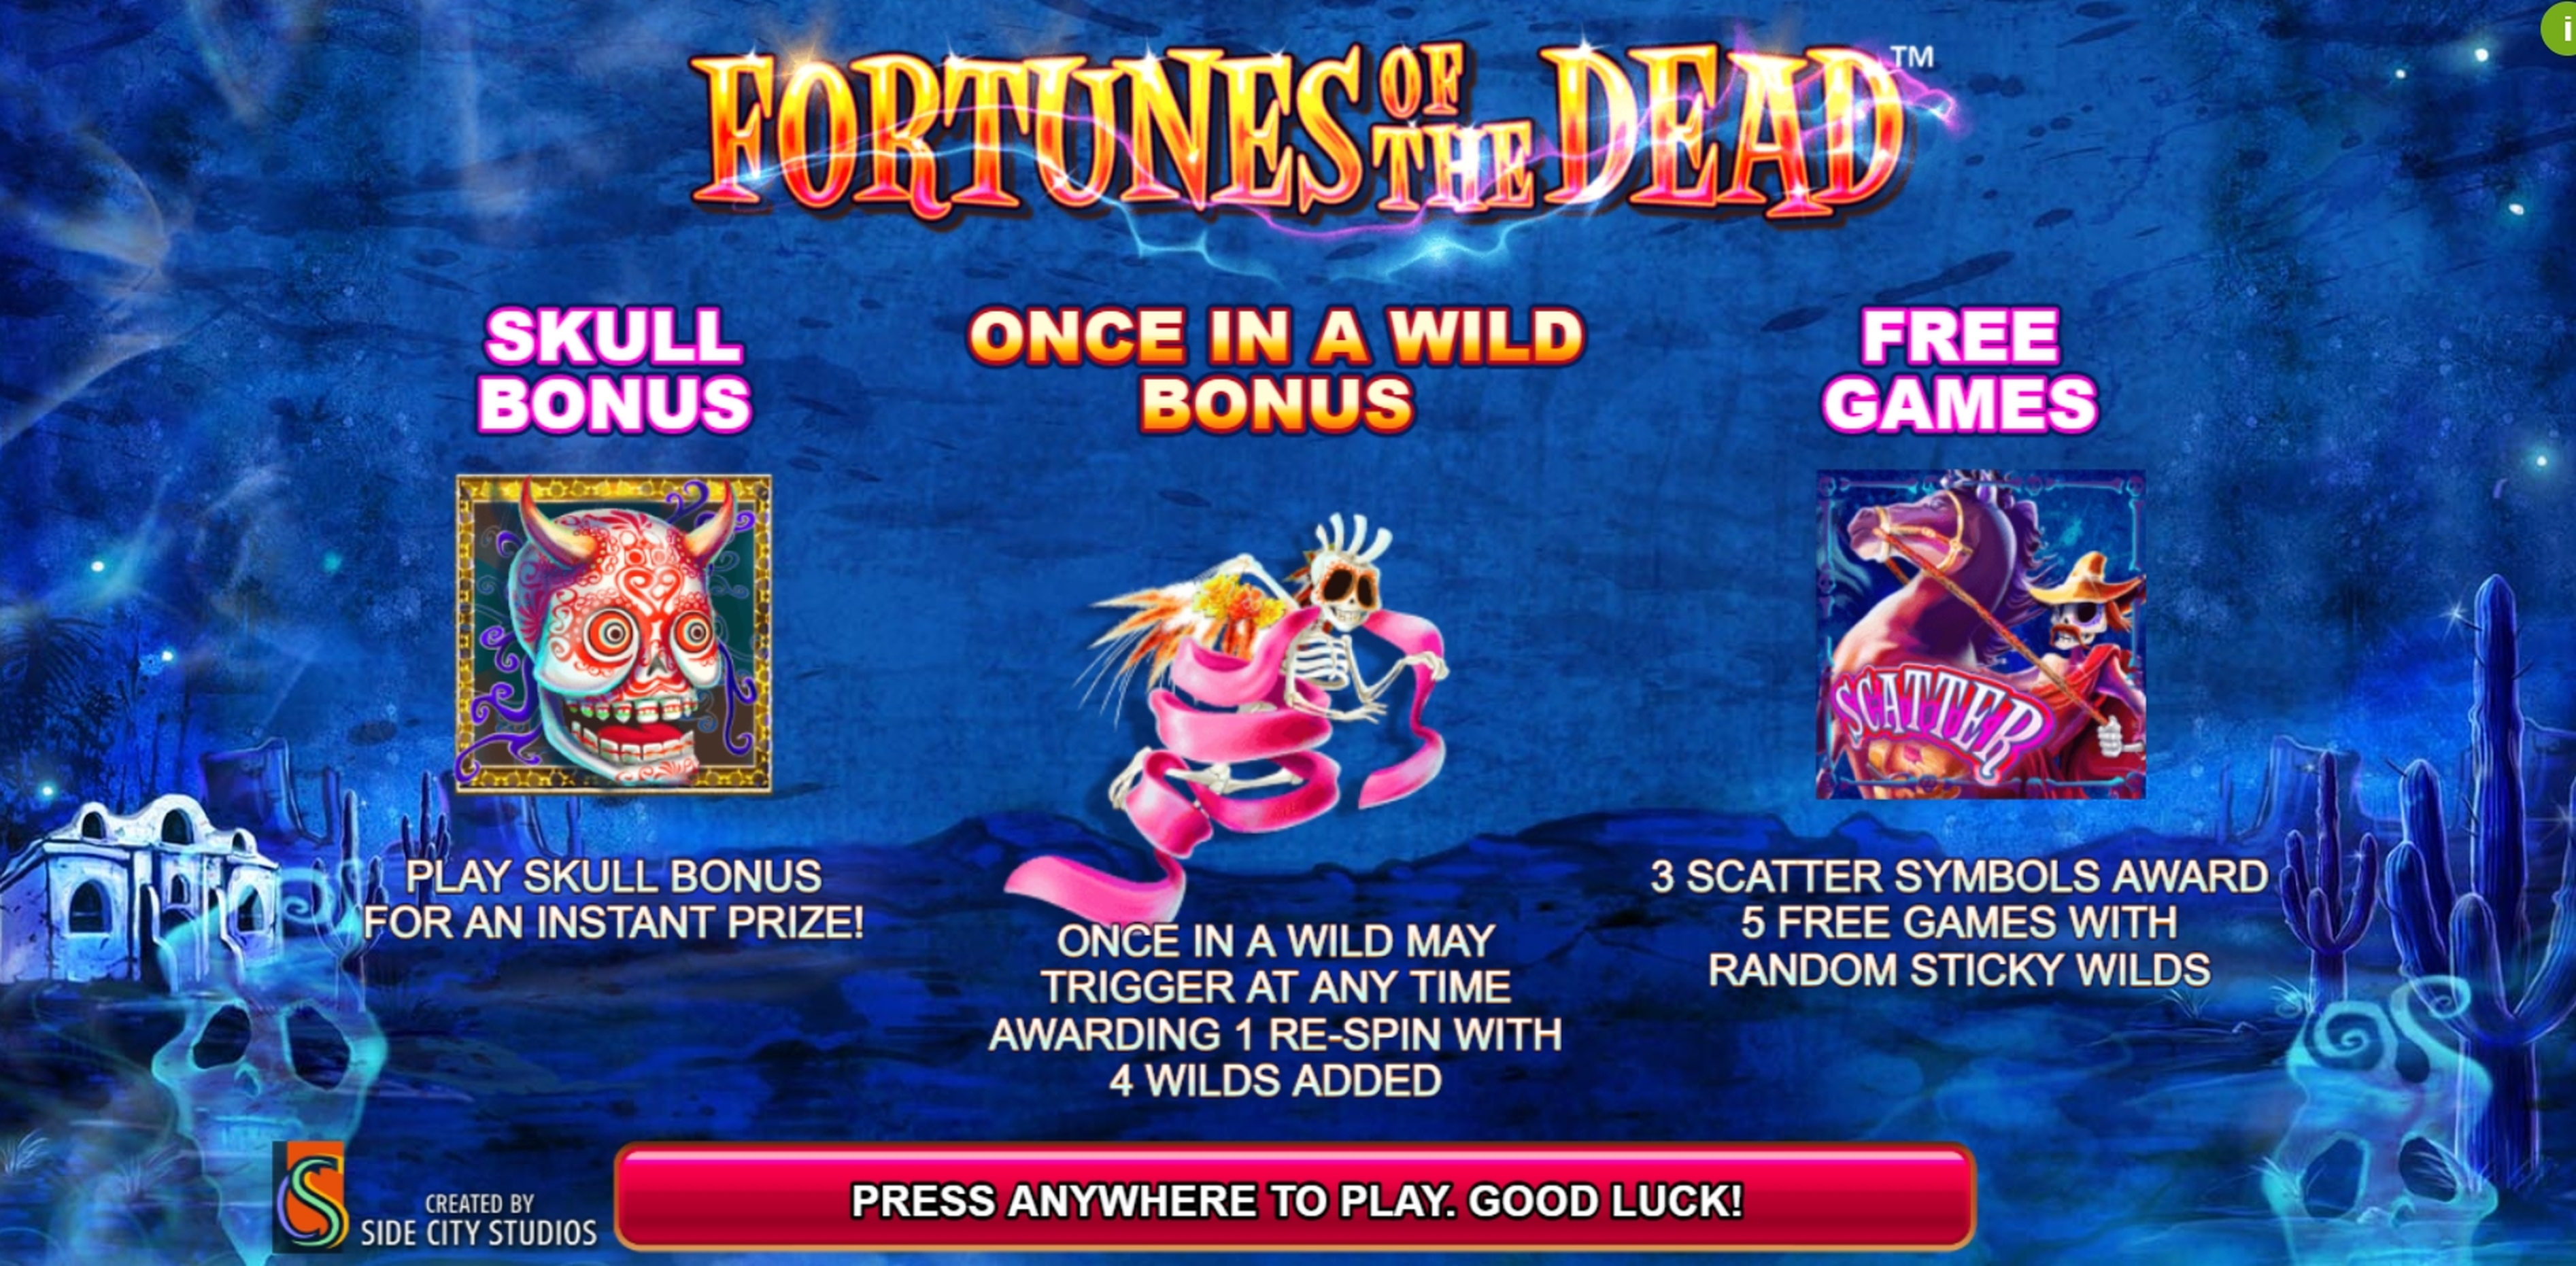 Play Fortunes of the Dead Free Casino Slot Game by Side City Studios